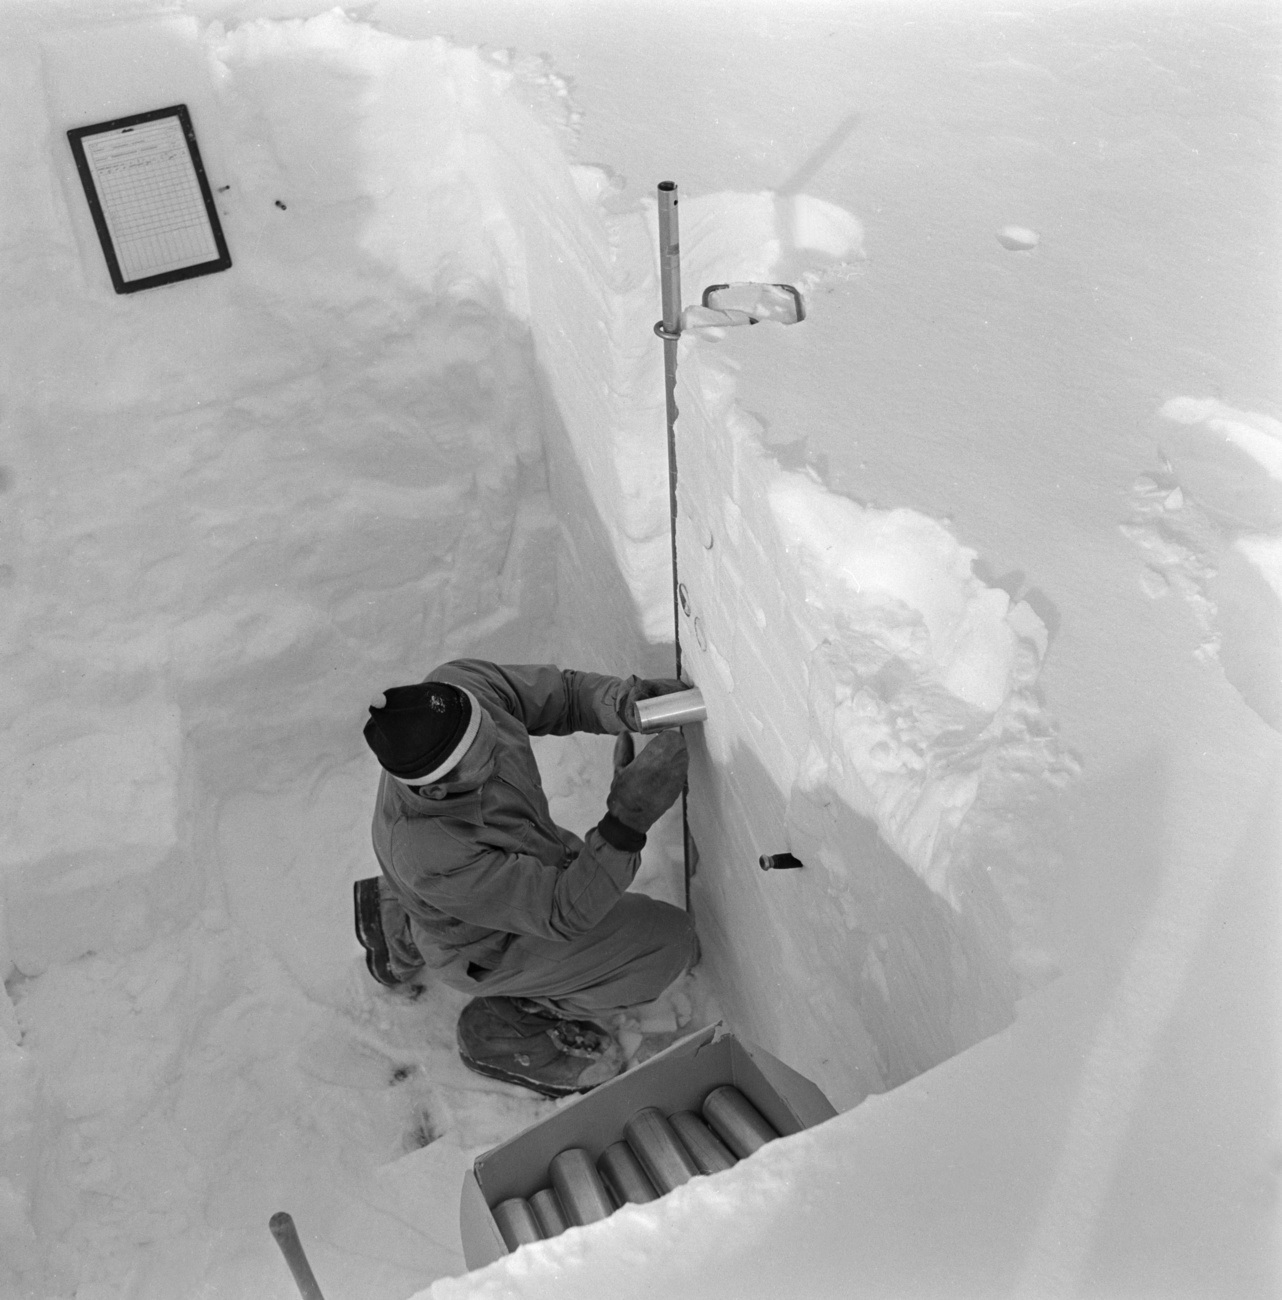 These observers conduct a “snow profile” to examine a cross-section of the snowpack.